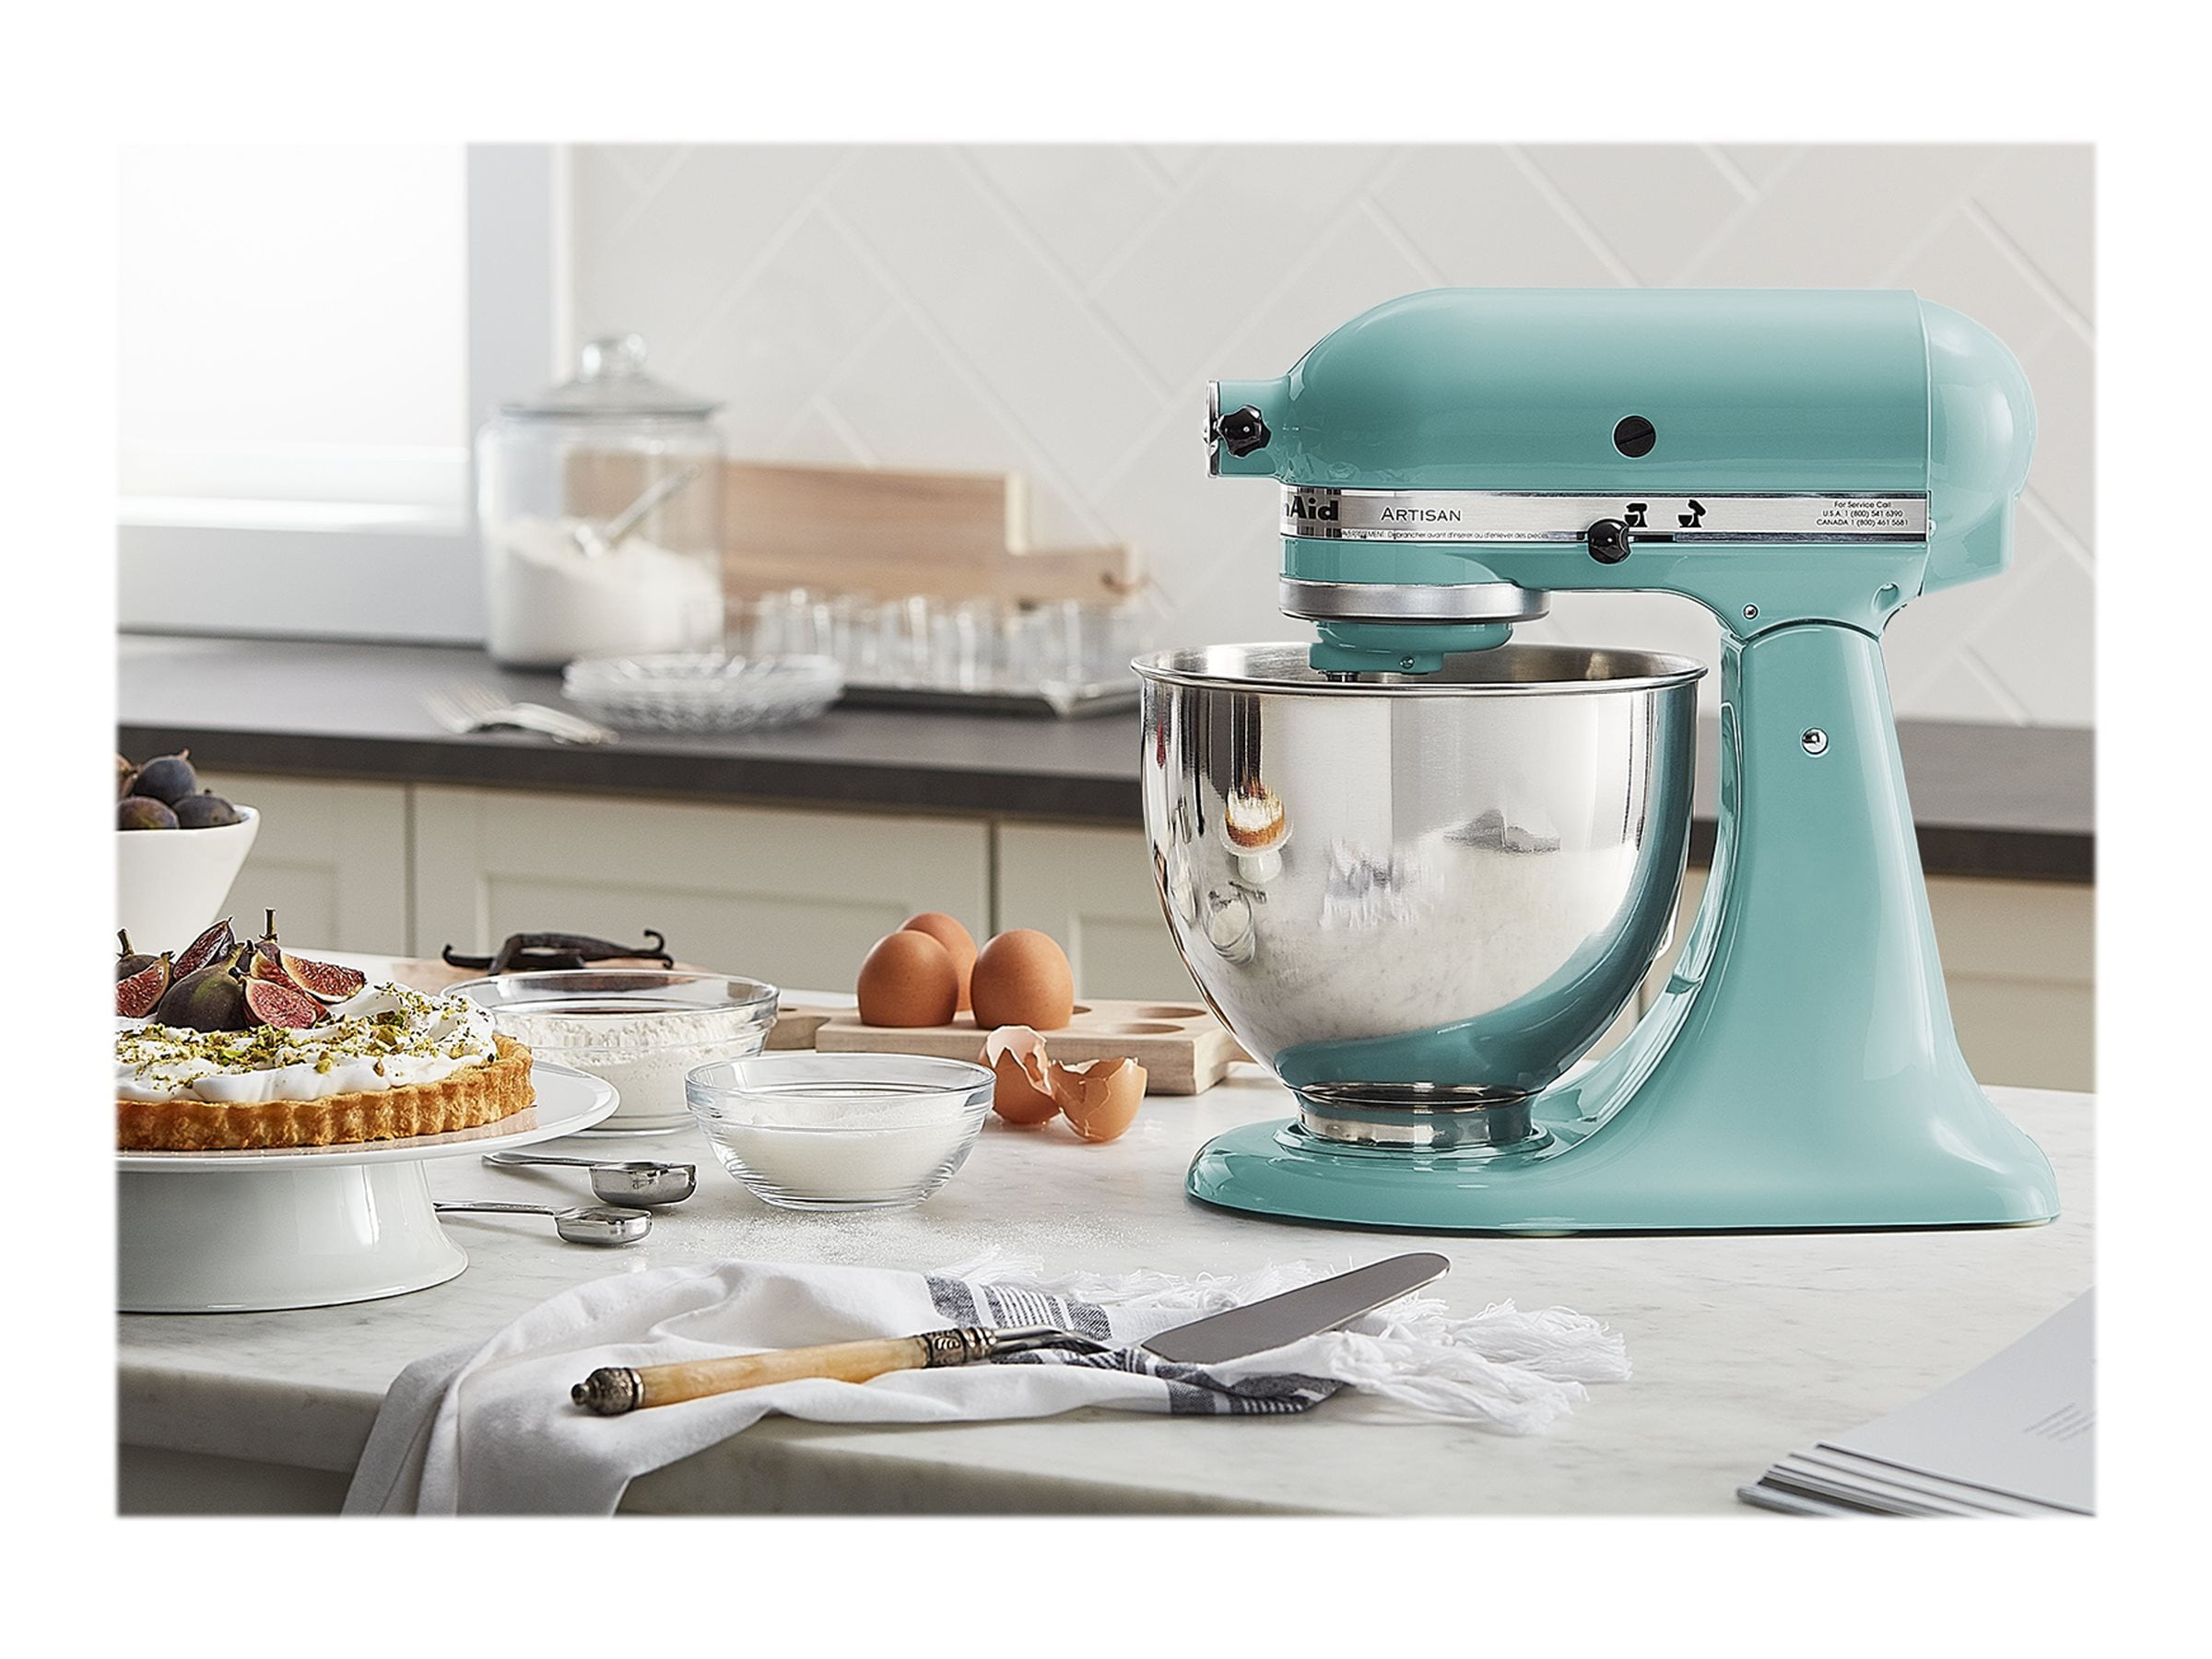 Pawn 1 - The KitchenAid Artisan stand mixer is the perfect kitchen  companion. The mixer includes a 5 quart stainless steel bowl with handle,  dough hook, flat beater, and wire whip. The